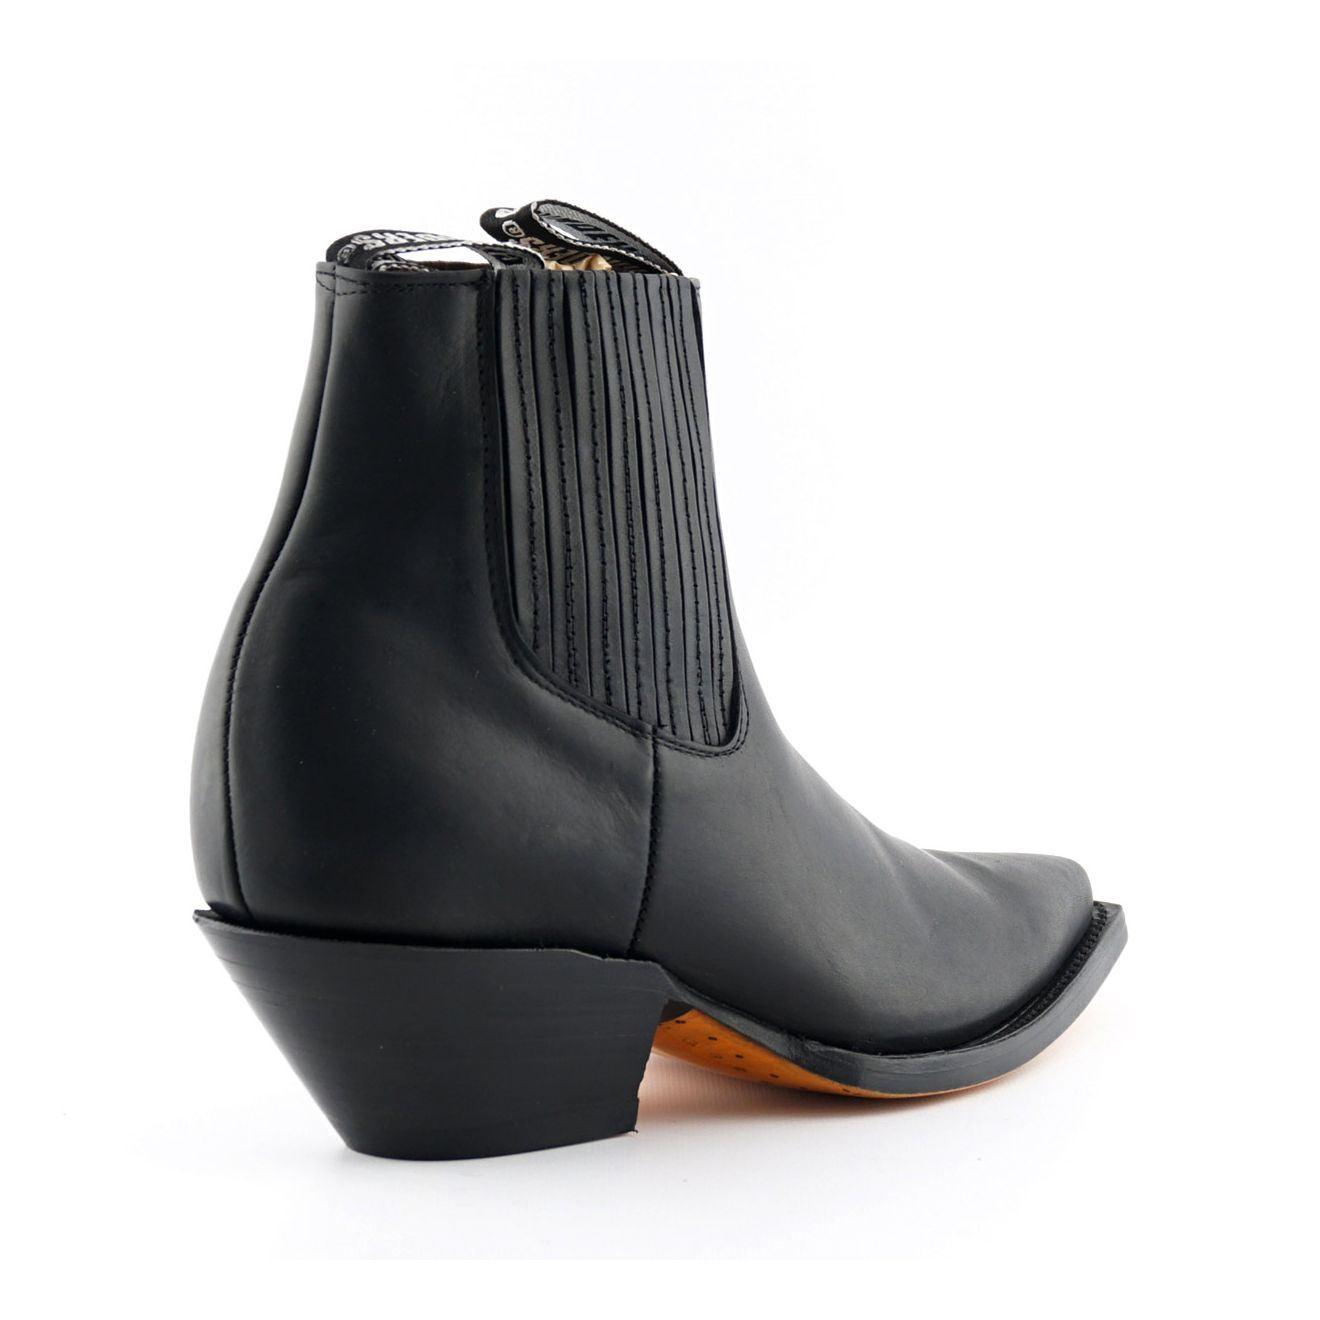 Grinders Unisex Black Western Chelsea Boots- Mustang - Upperclass Fashions 